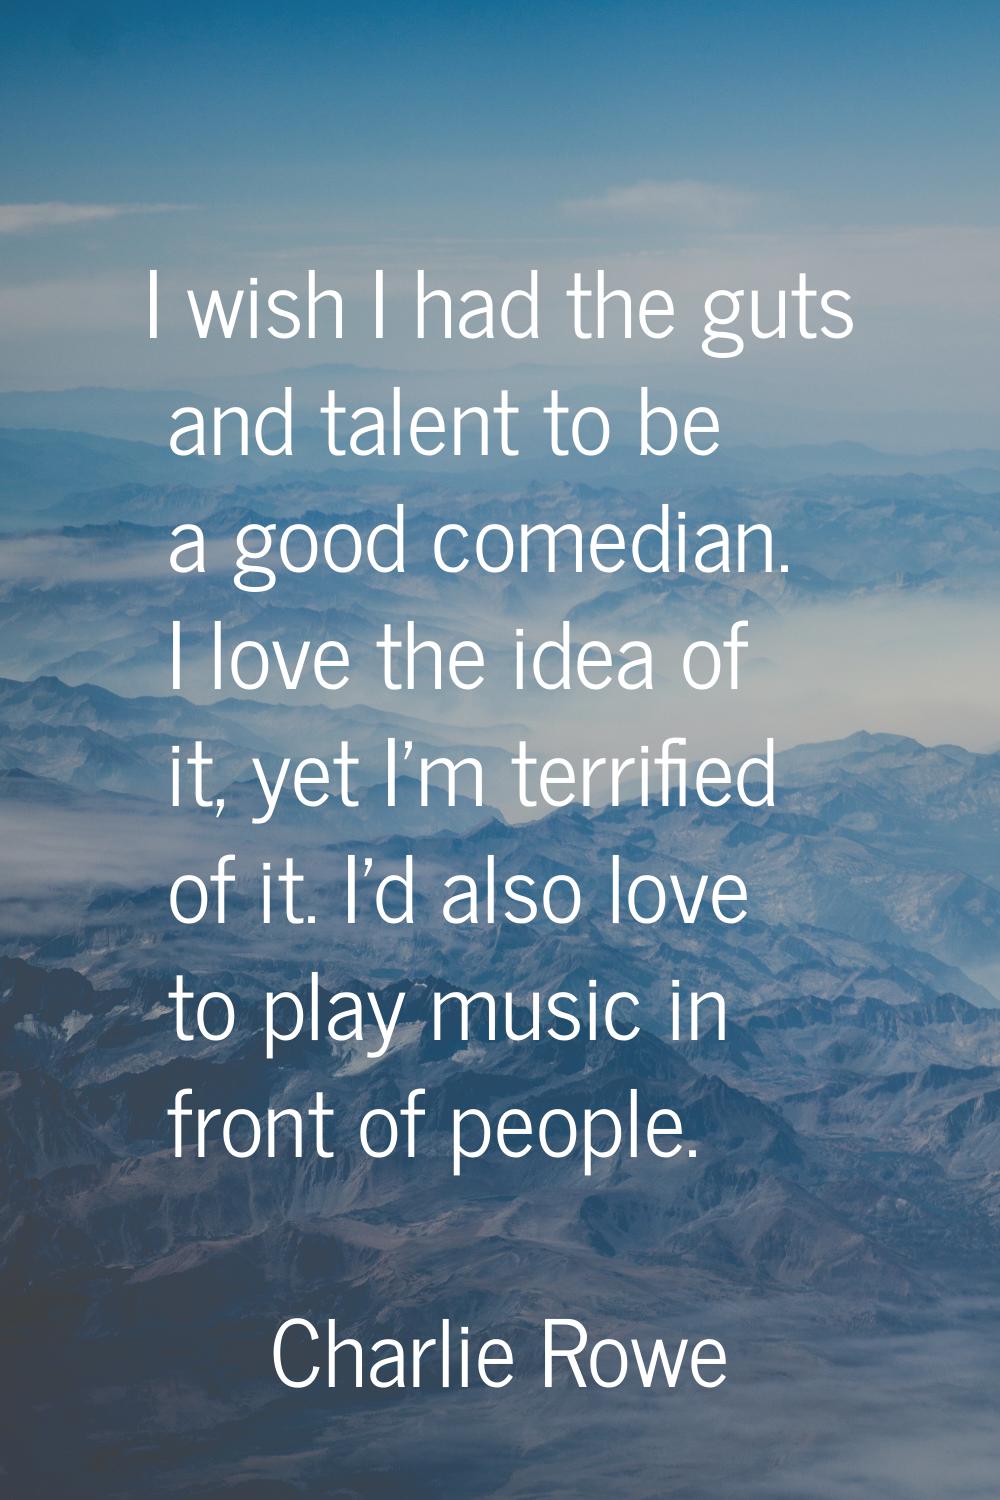 I wish I had the guts and talent to be a good comedian. I love the idea of it, yet I'm terrified of